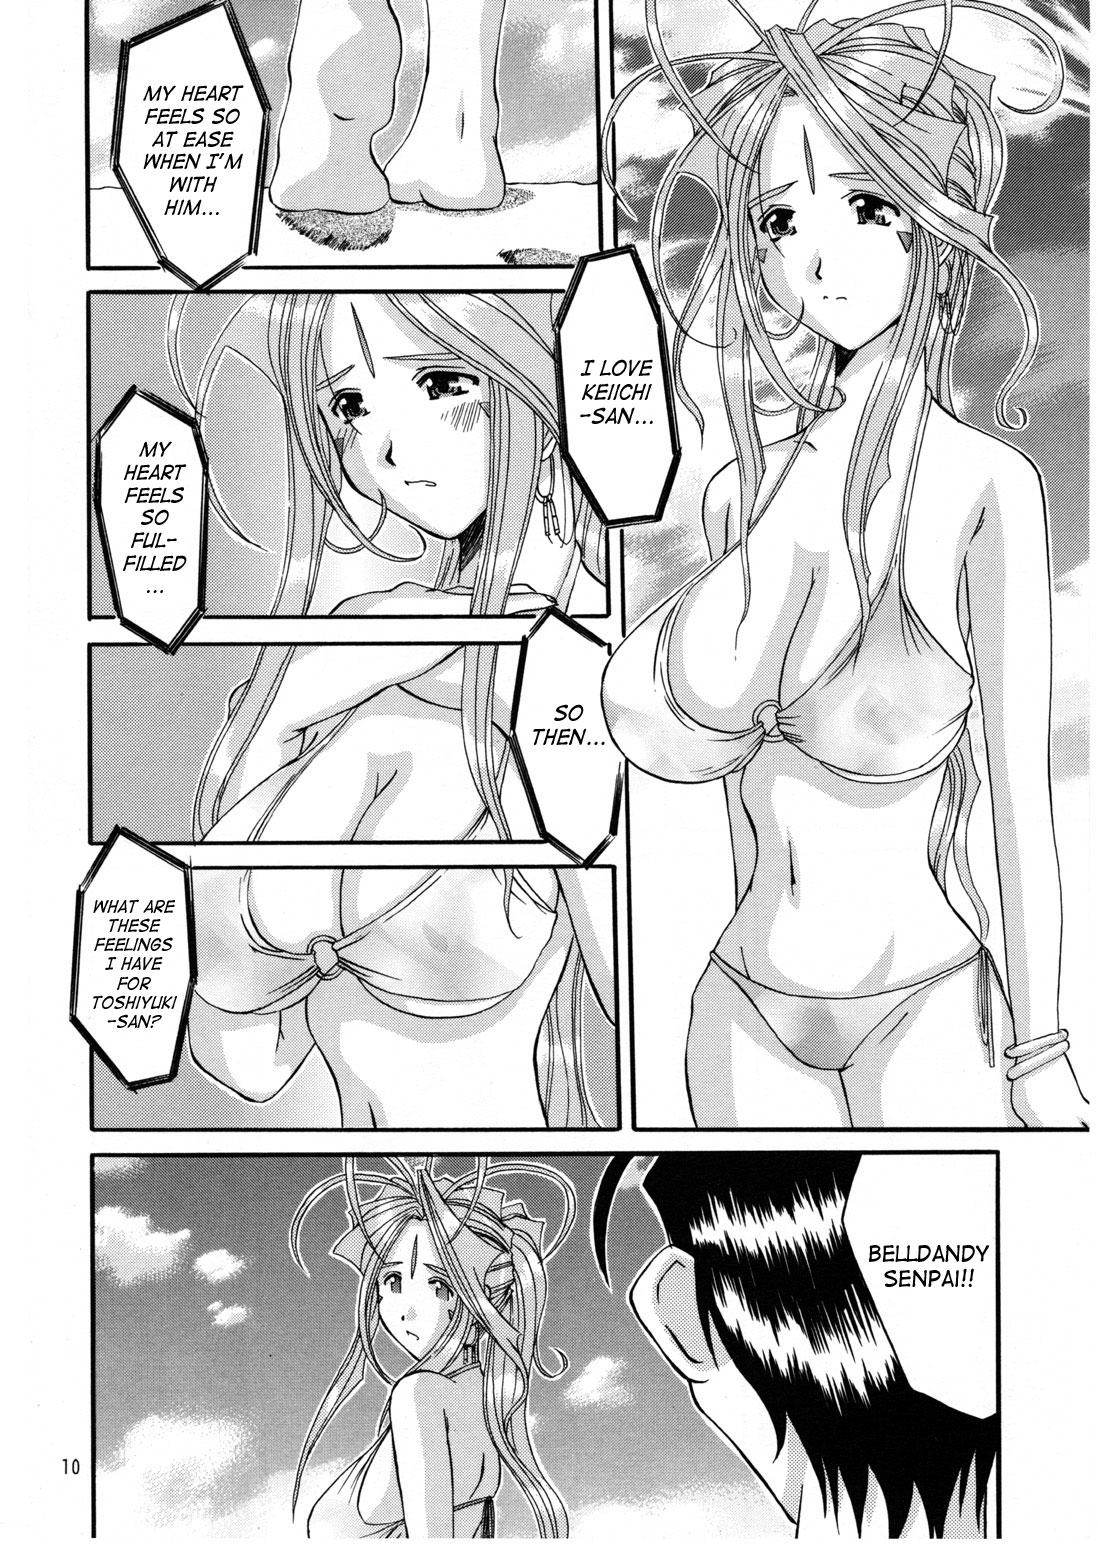 Spoon Nightmare of My Goddess Summer Interval - Ah my goddess 18 Year Old - Page 9